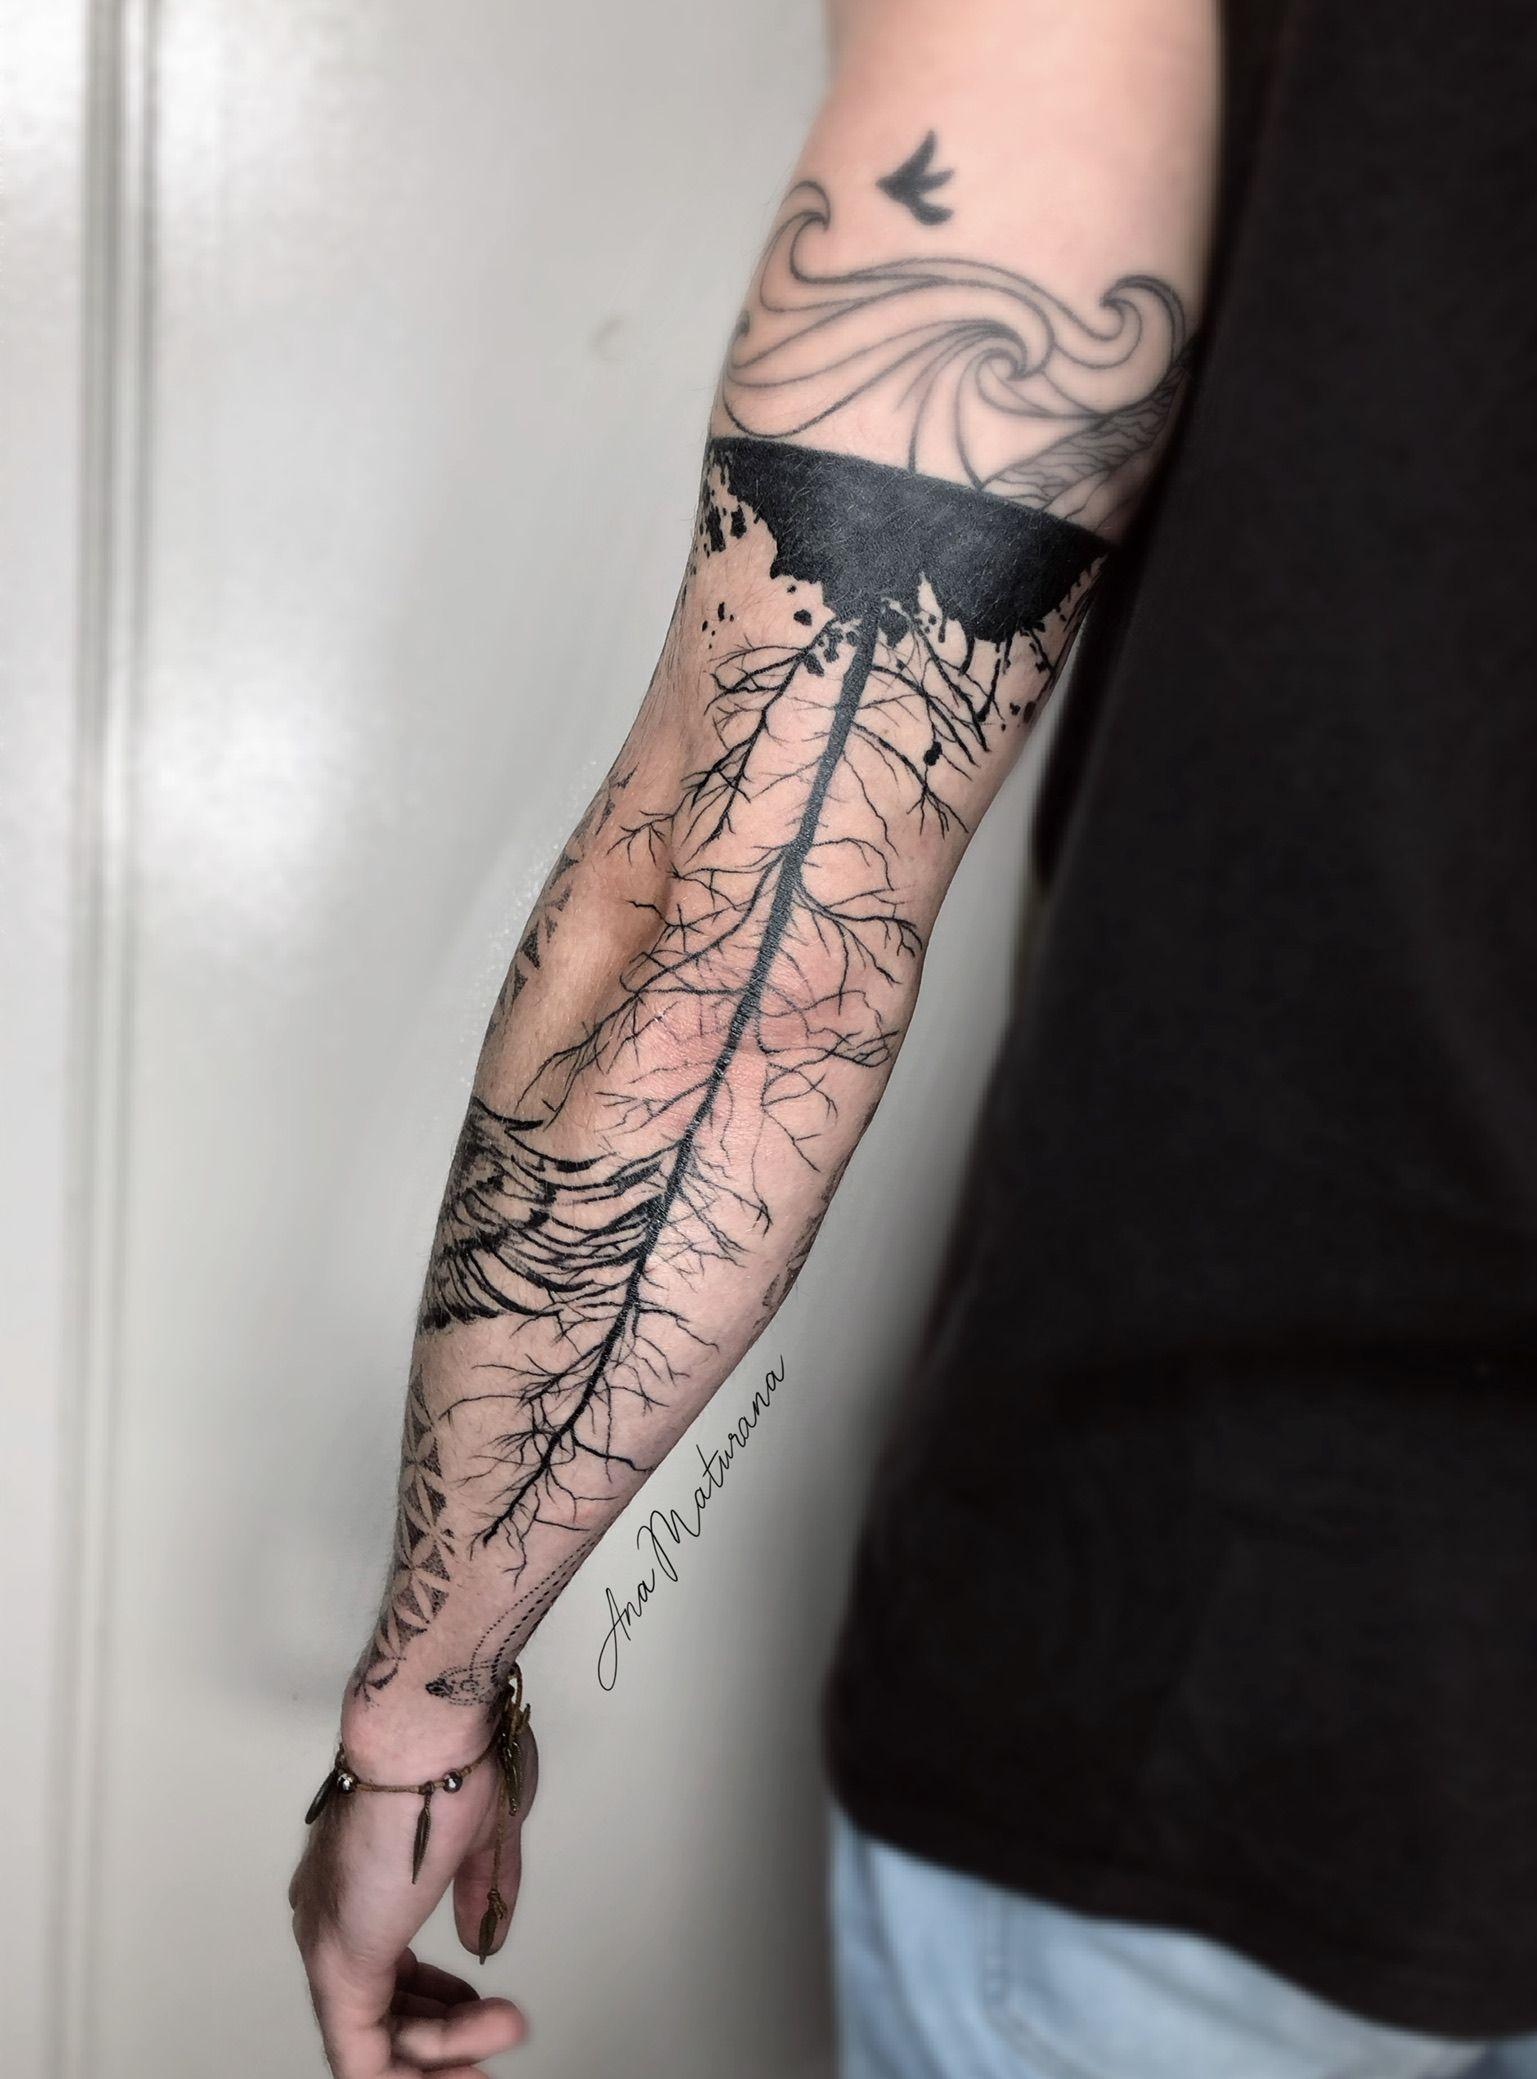 Freehand watercolor abstract nature sister tattoo. by Mentjuh on DeviantArt